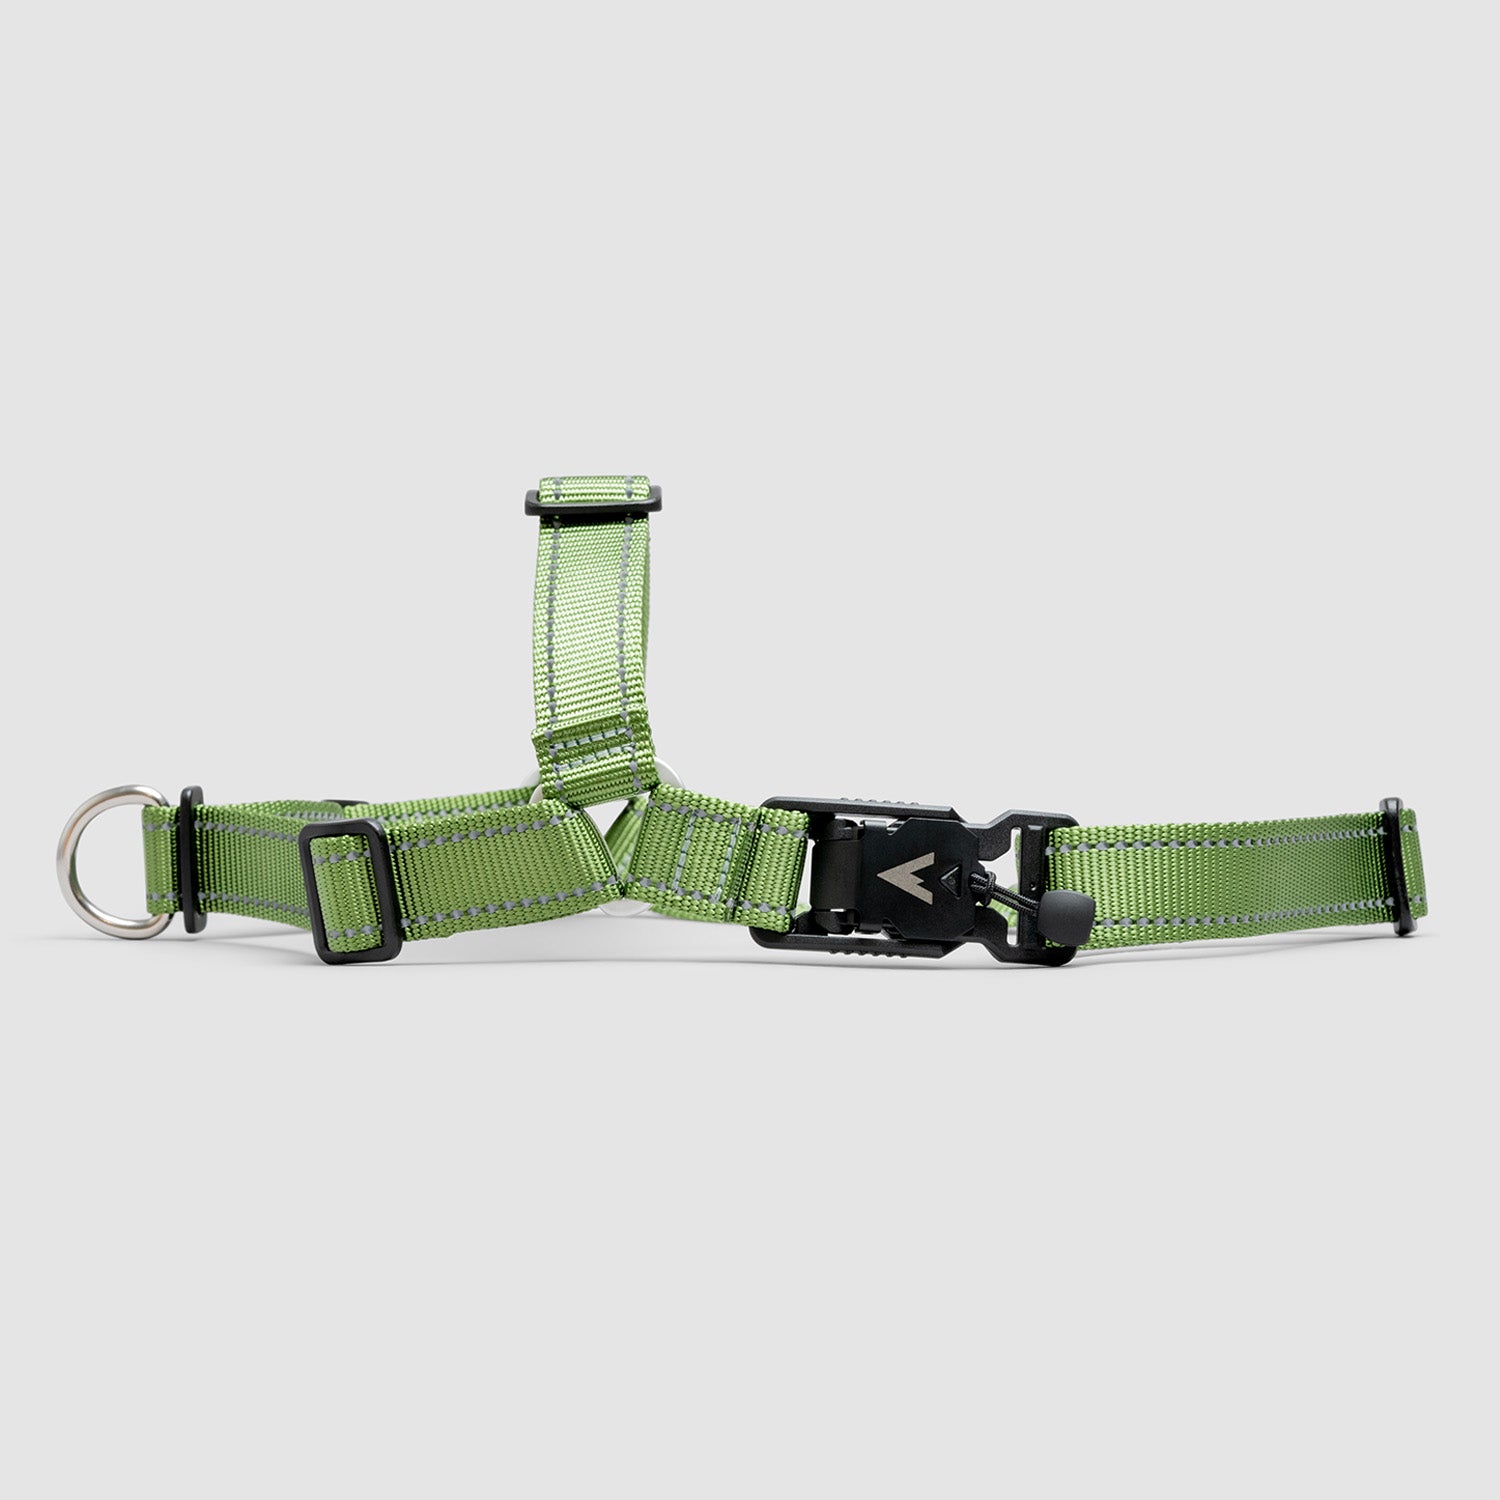 atlas pet company lifetime harness no pull harness with lifetime warranty for active dogs handmade in colorado --moss